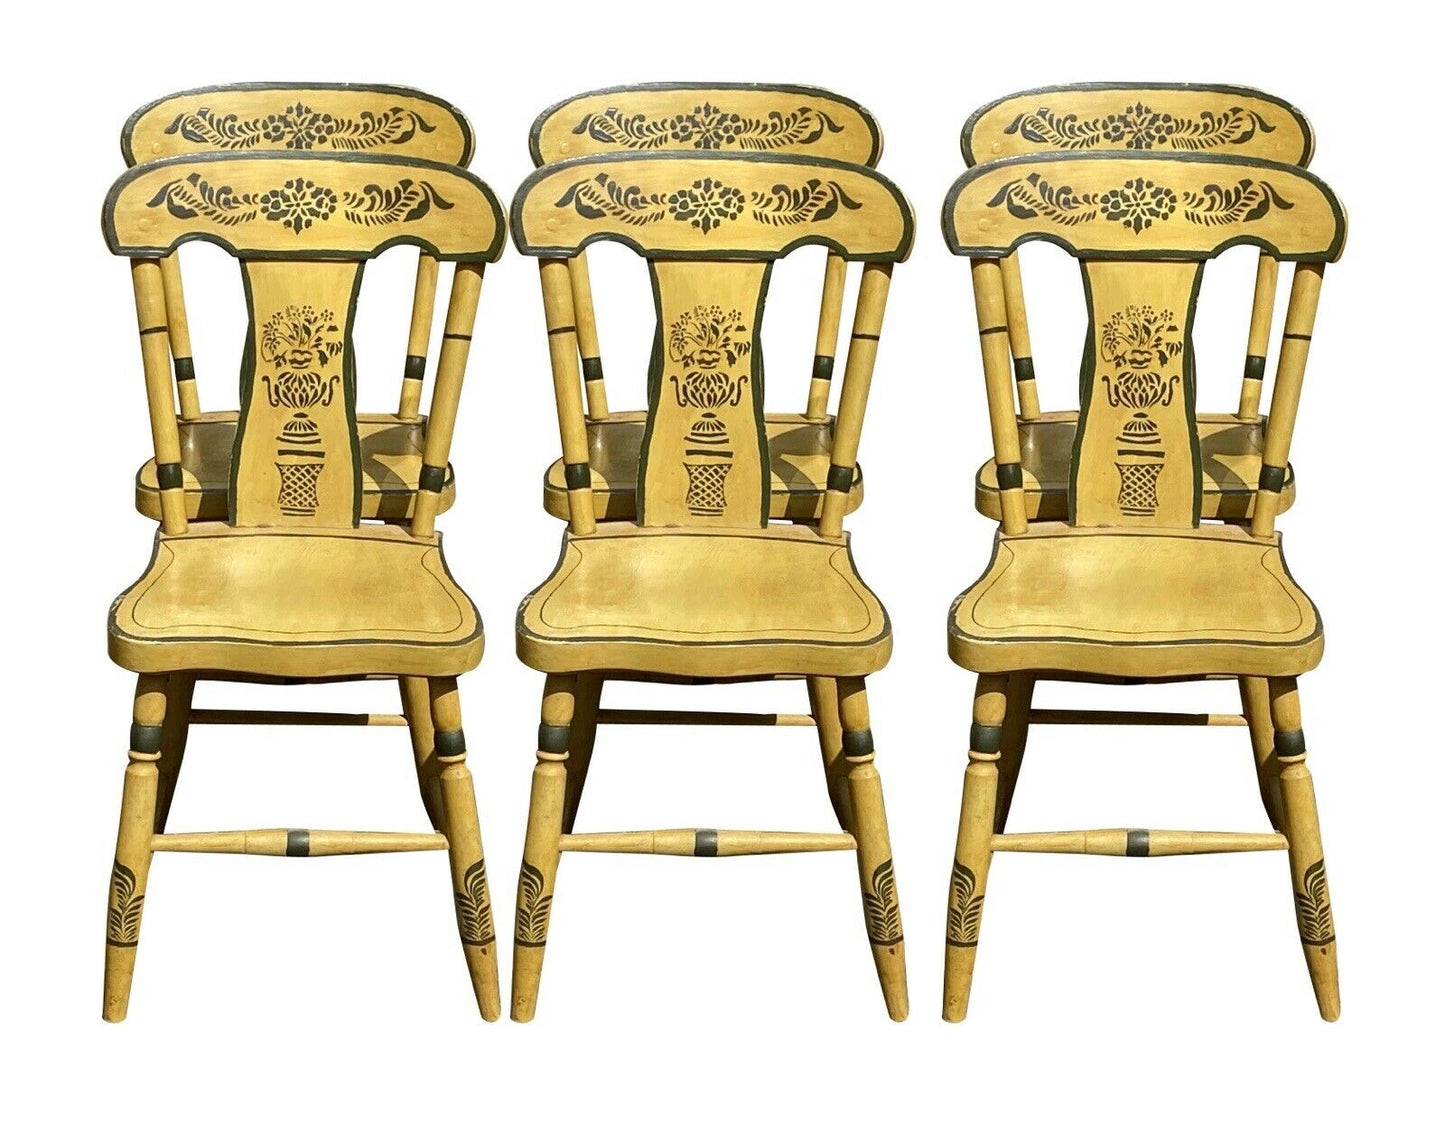 19TH C ANTIQUE SET OF 6 COUNTRY SHERATON YELLOW FANCY PAINT DINING CHAIRS